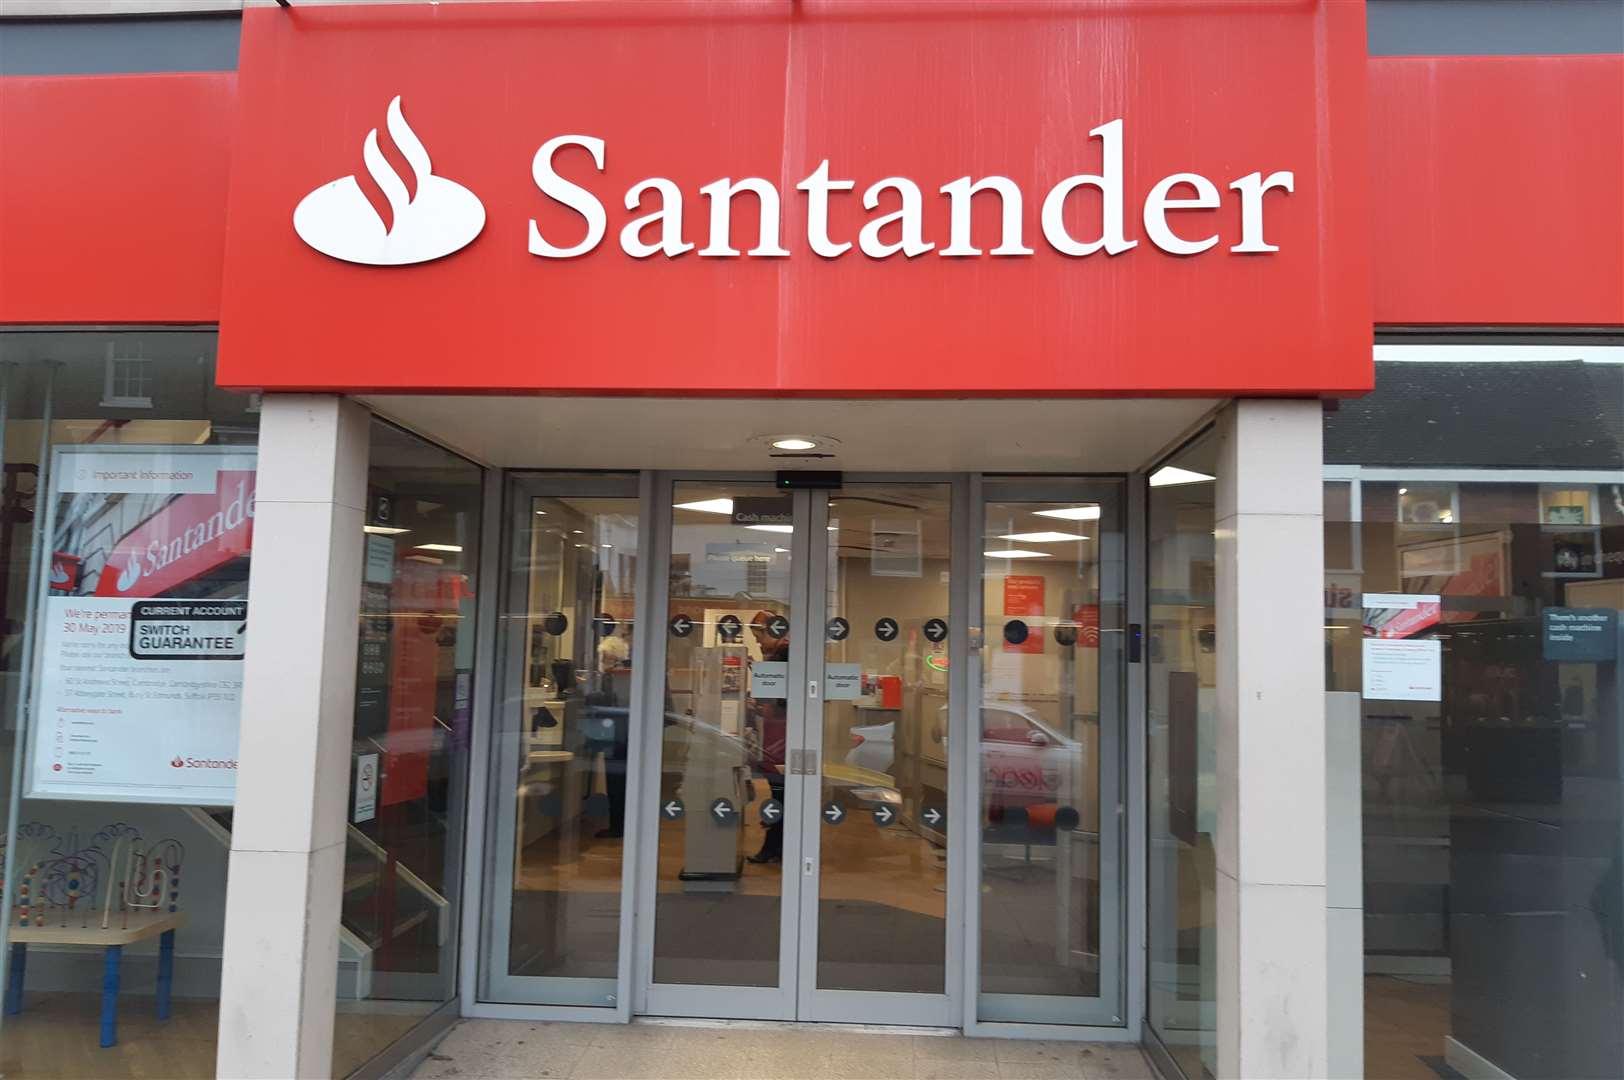 Santander is urging customers to be cautious when shopping through online selling sites and marketplaces. Image: Stock photo.